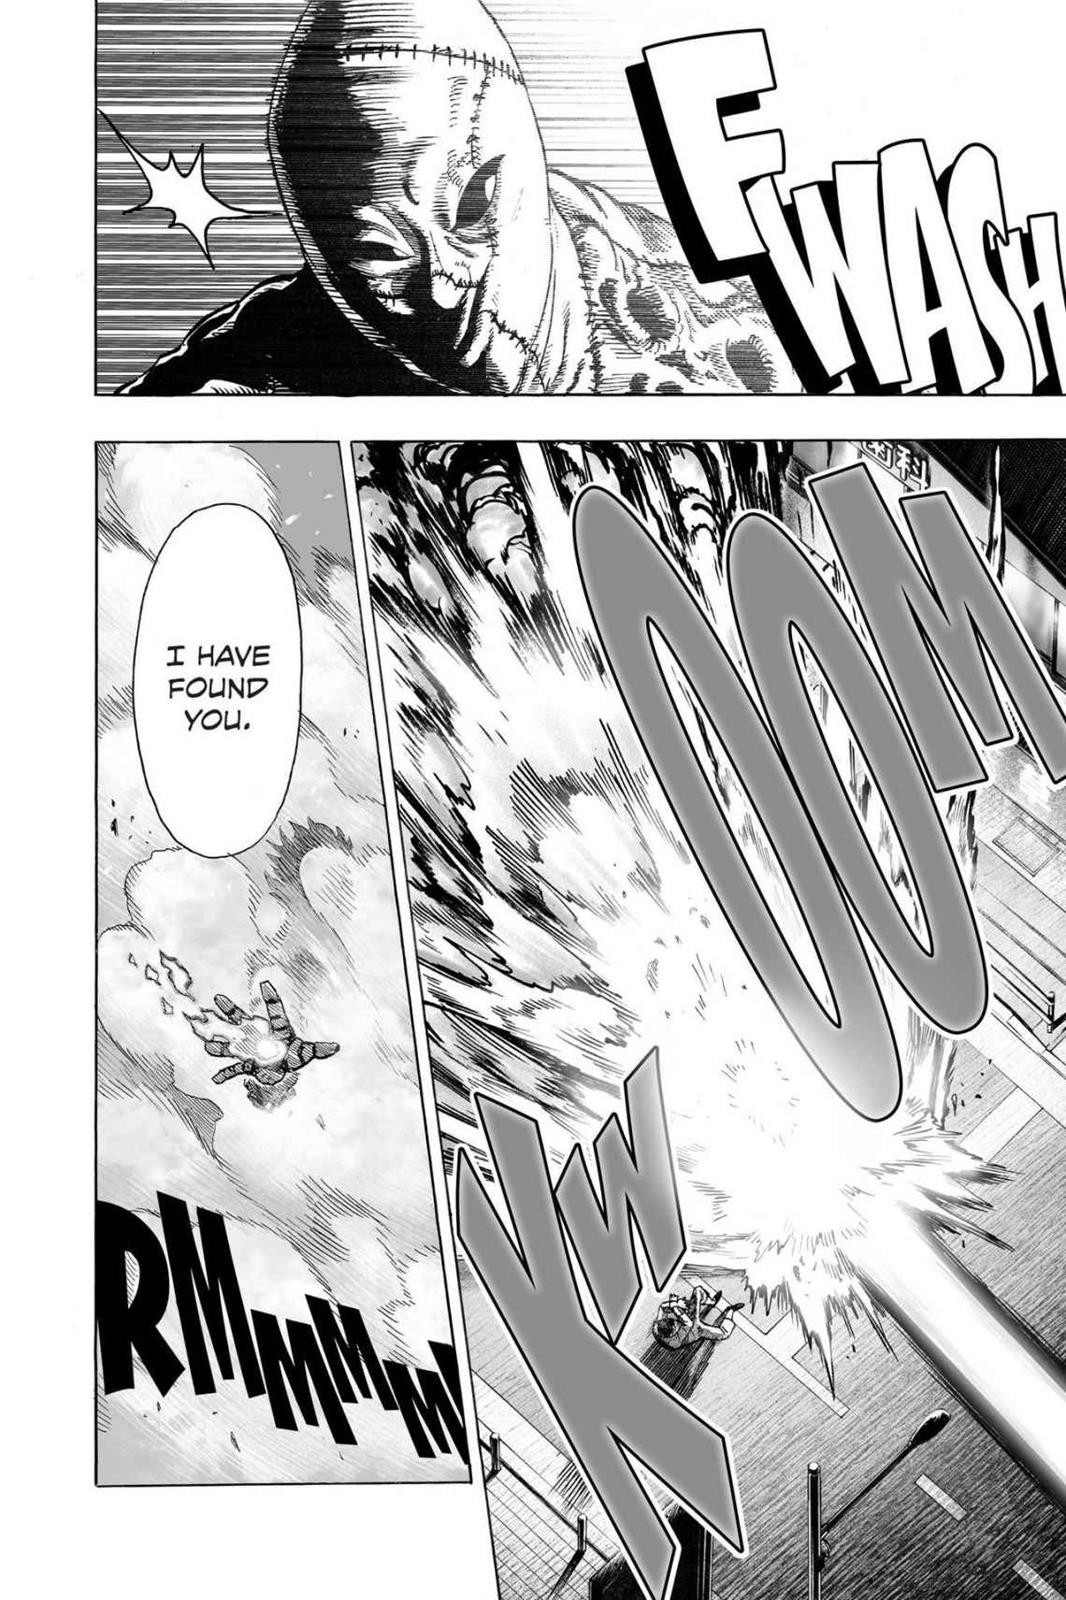 One-Punch Man, Punch 63 image 22